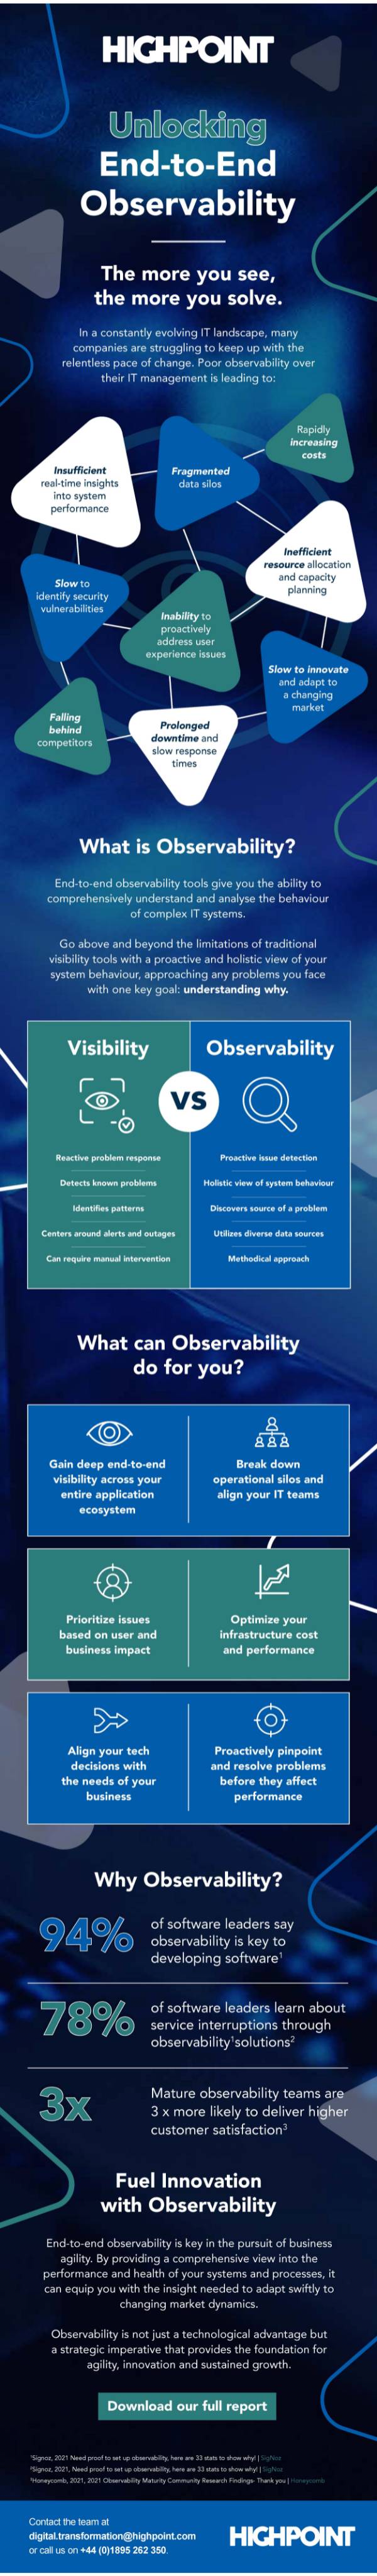 End-to-End Observability Infographic